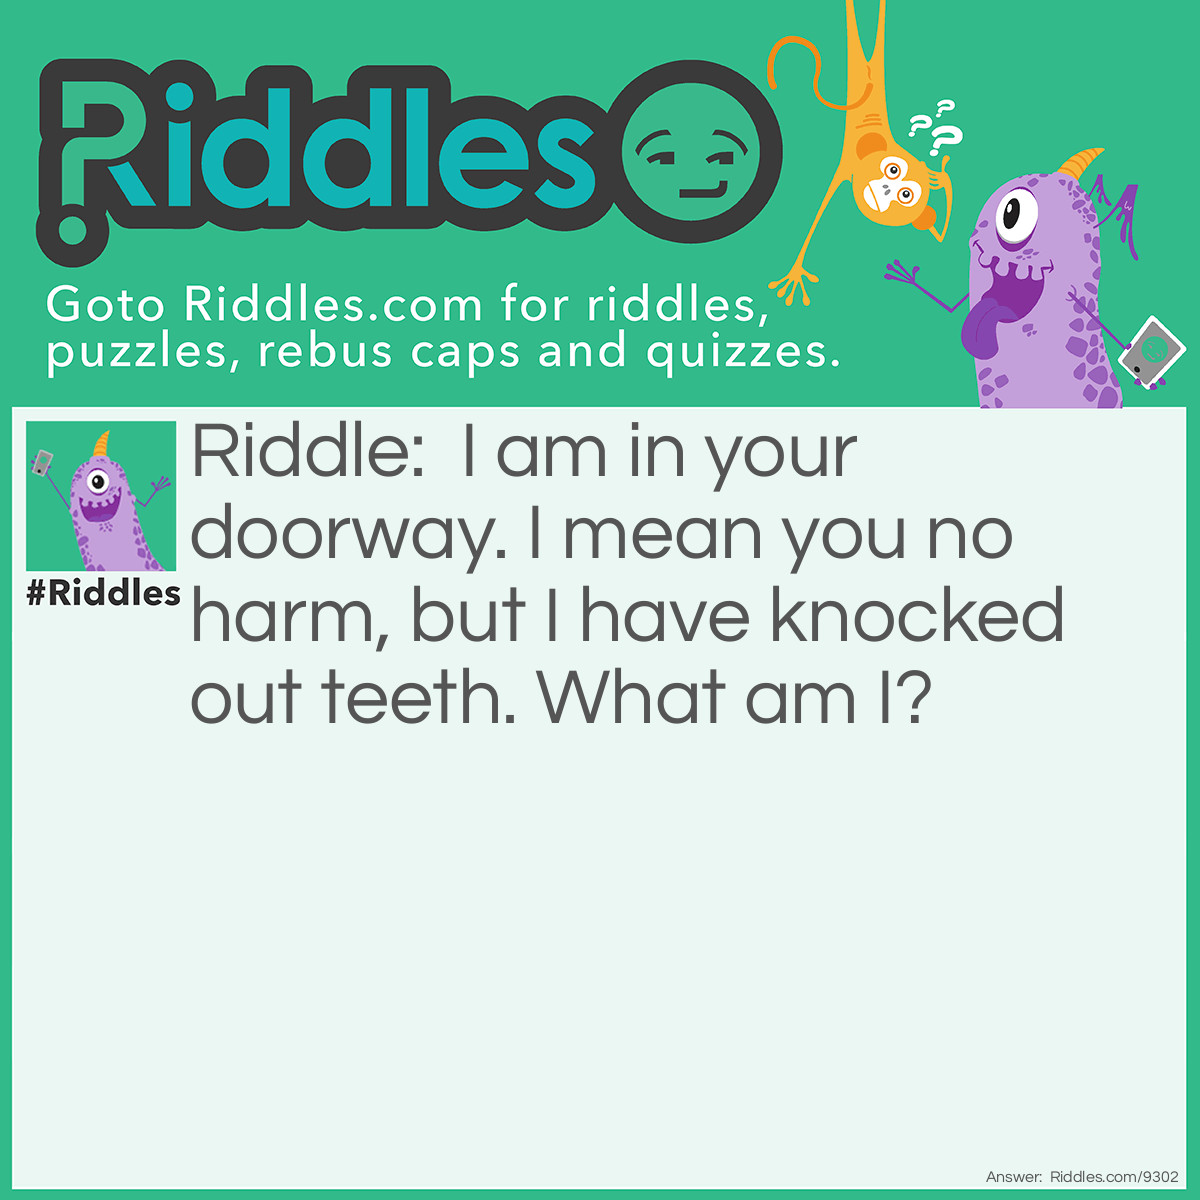 Riddle: I am in your doorway. I mean you no harm, but I have knocked out teeth. What am I? Answer: A door.